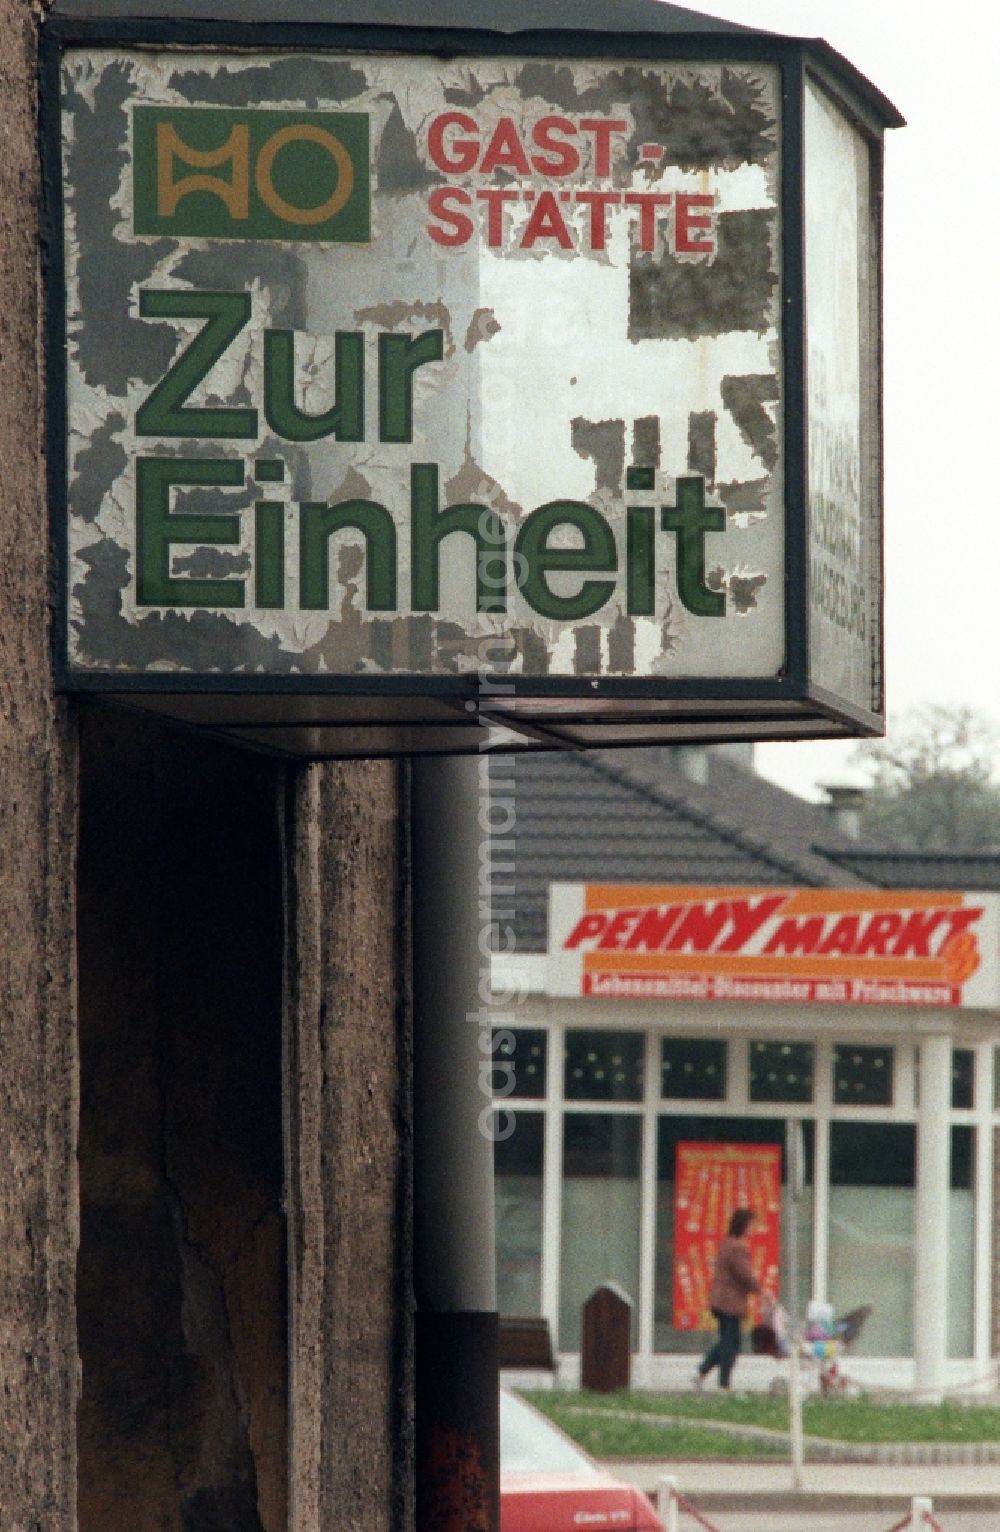 GDR picture archive: Staßfurt - Advertising sign for a former HO restaurant Zur Einheit in Stassfurt in the state of Saxony-Anhalt in the area of the former GDR, German Democratic Republic